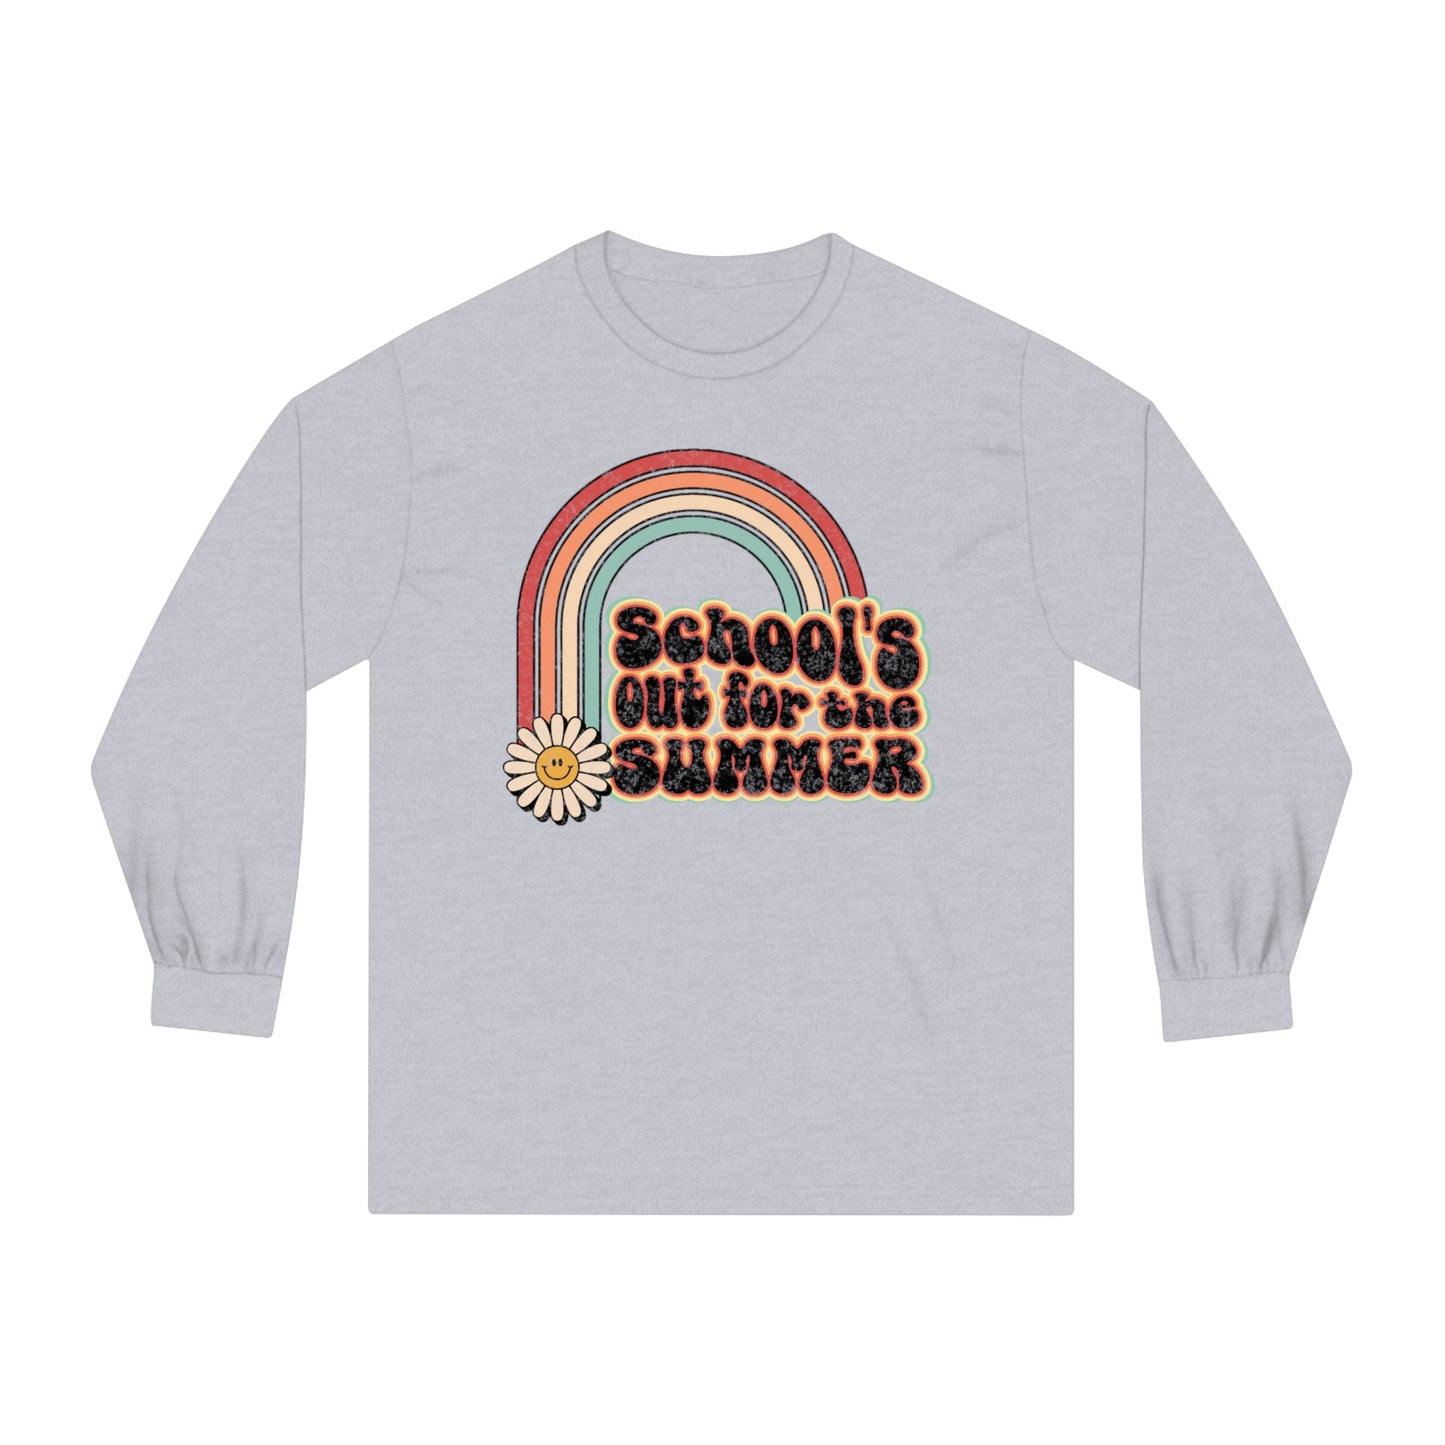 School’s out for the Summer - Unisex Classic Long Sleeve T-Shirt